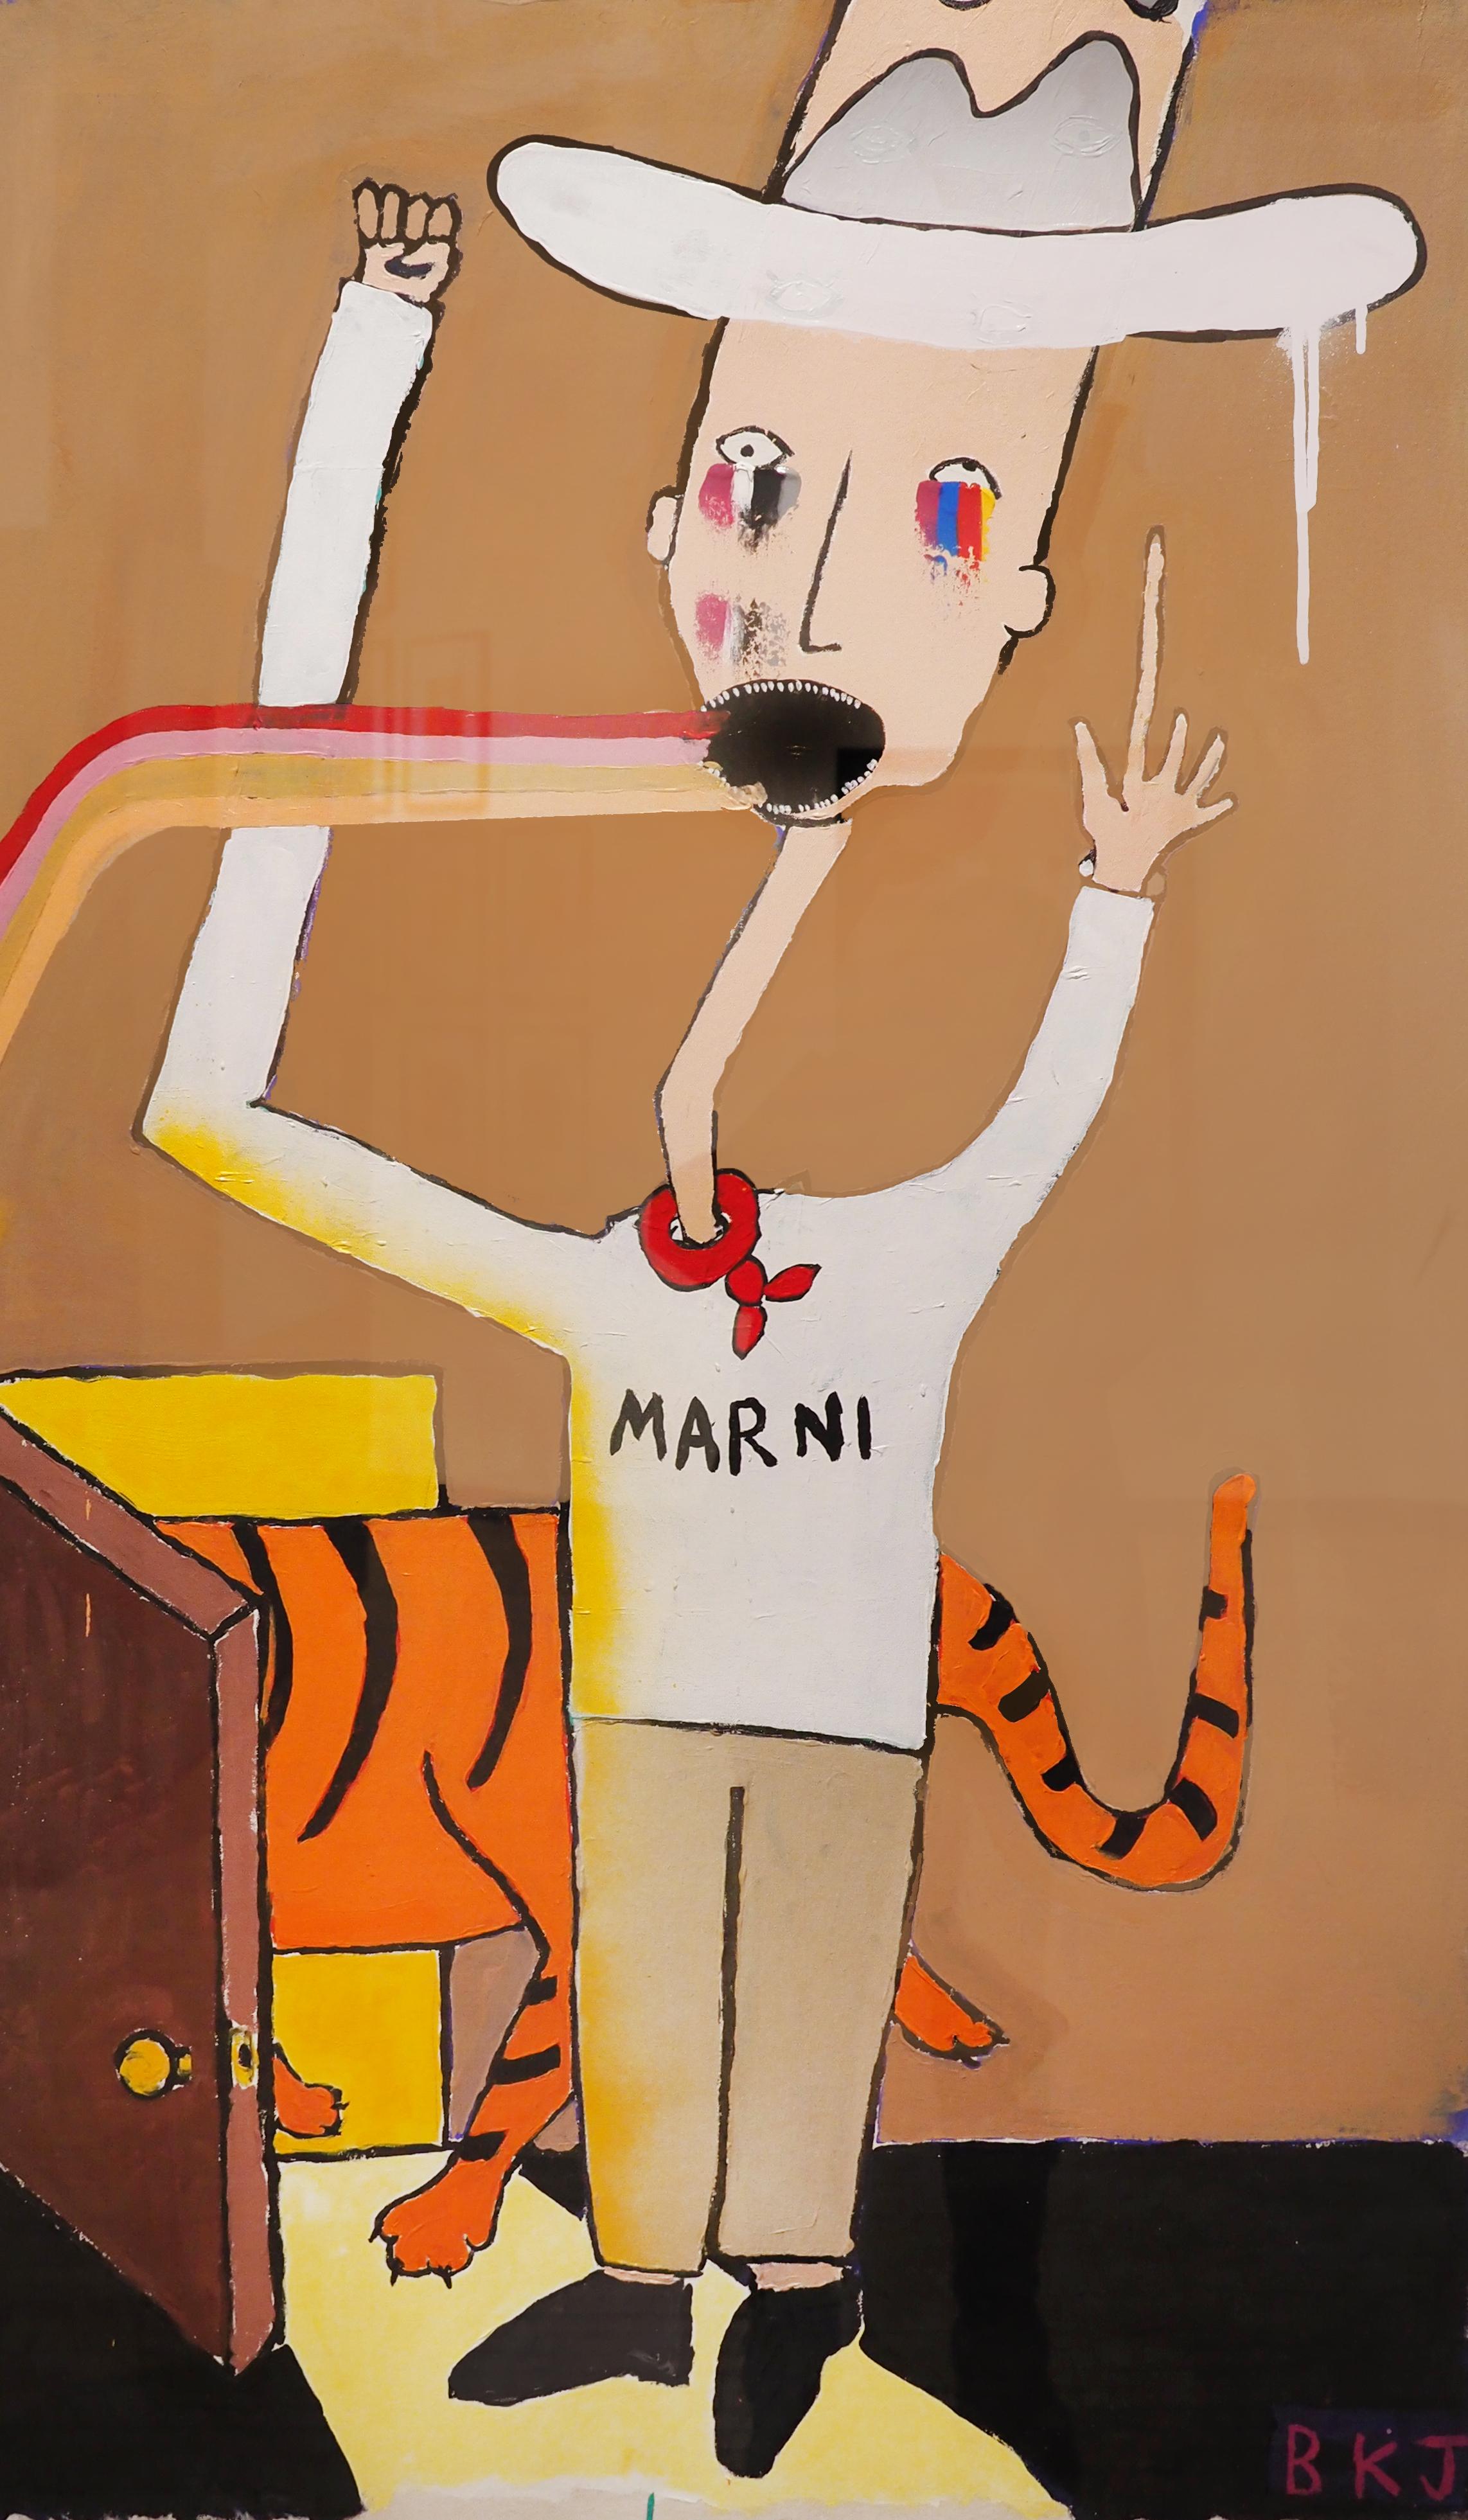 Marni displays a cowboy opening a door with a tiger at the characters side, suggesting themes of facing fear. As the bright, energetic colors portray the victory of overcoming obstacles, Brandon Jones uses bold, confident strokes to create an honest